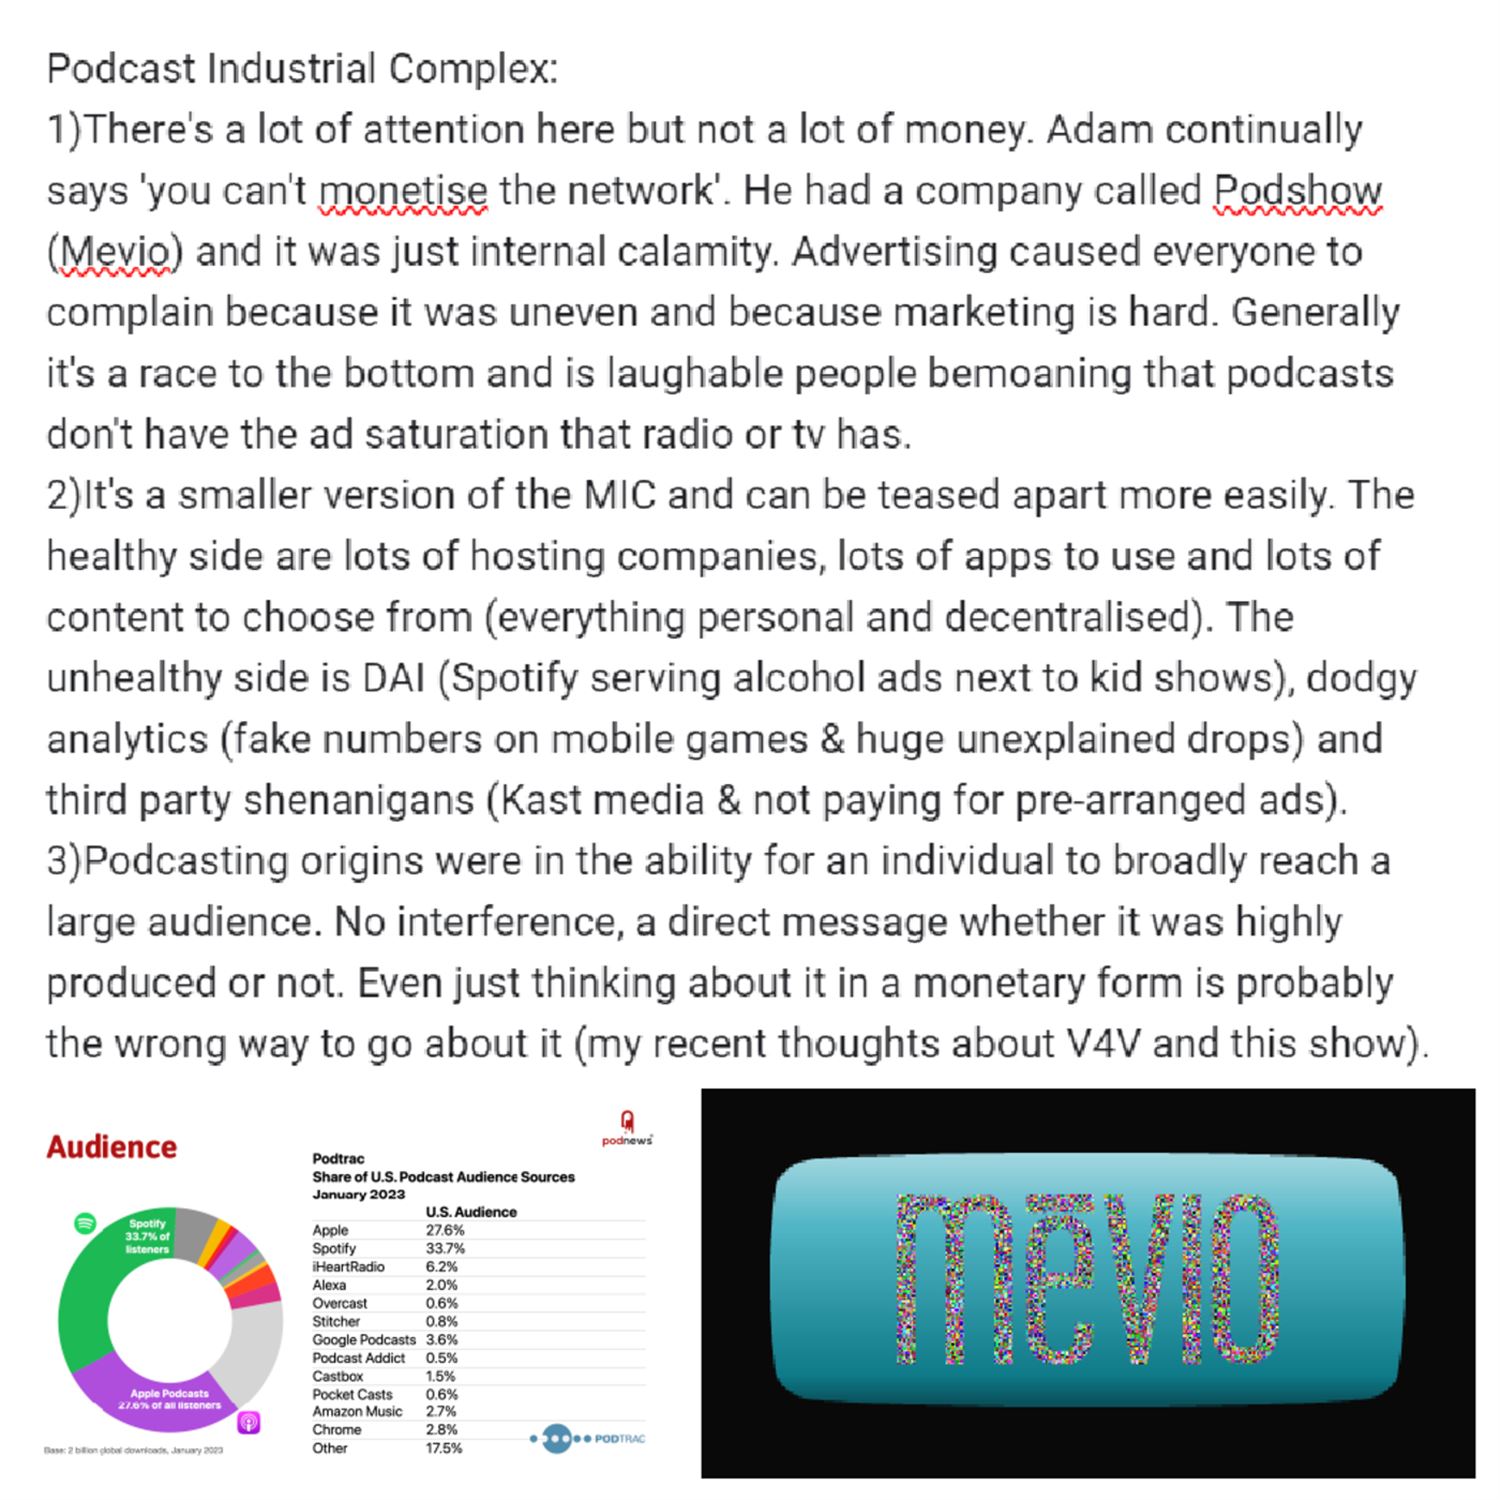 The Podcast Industrial Complex